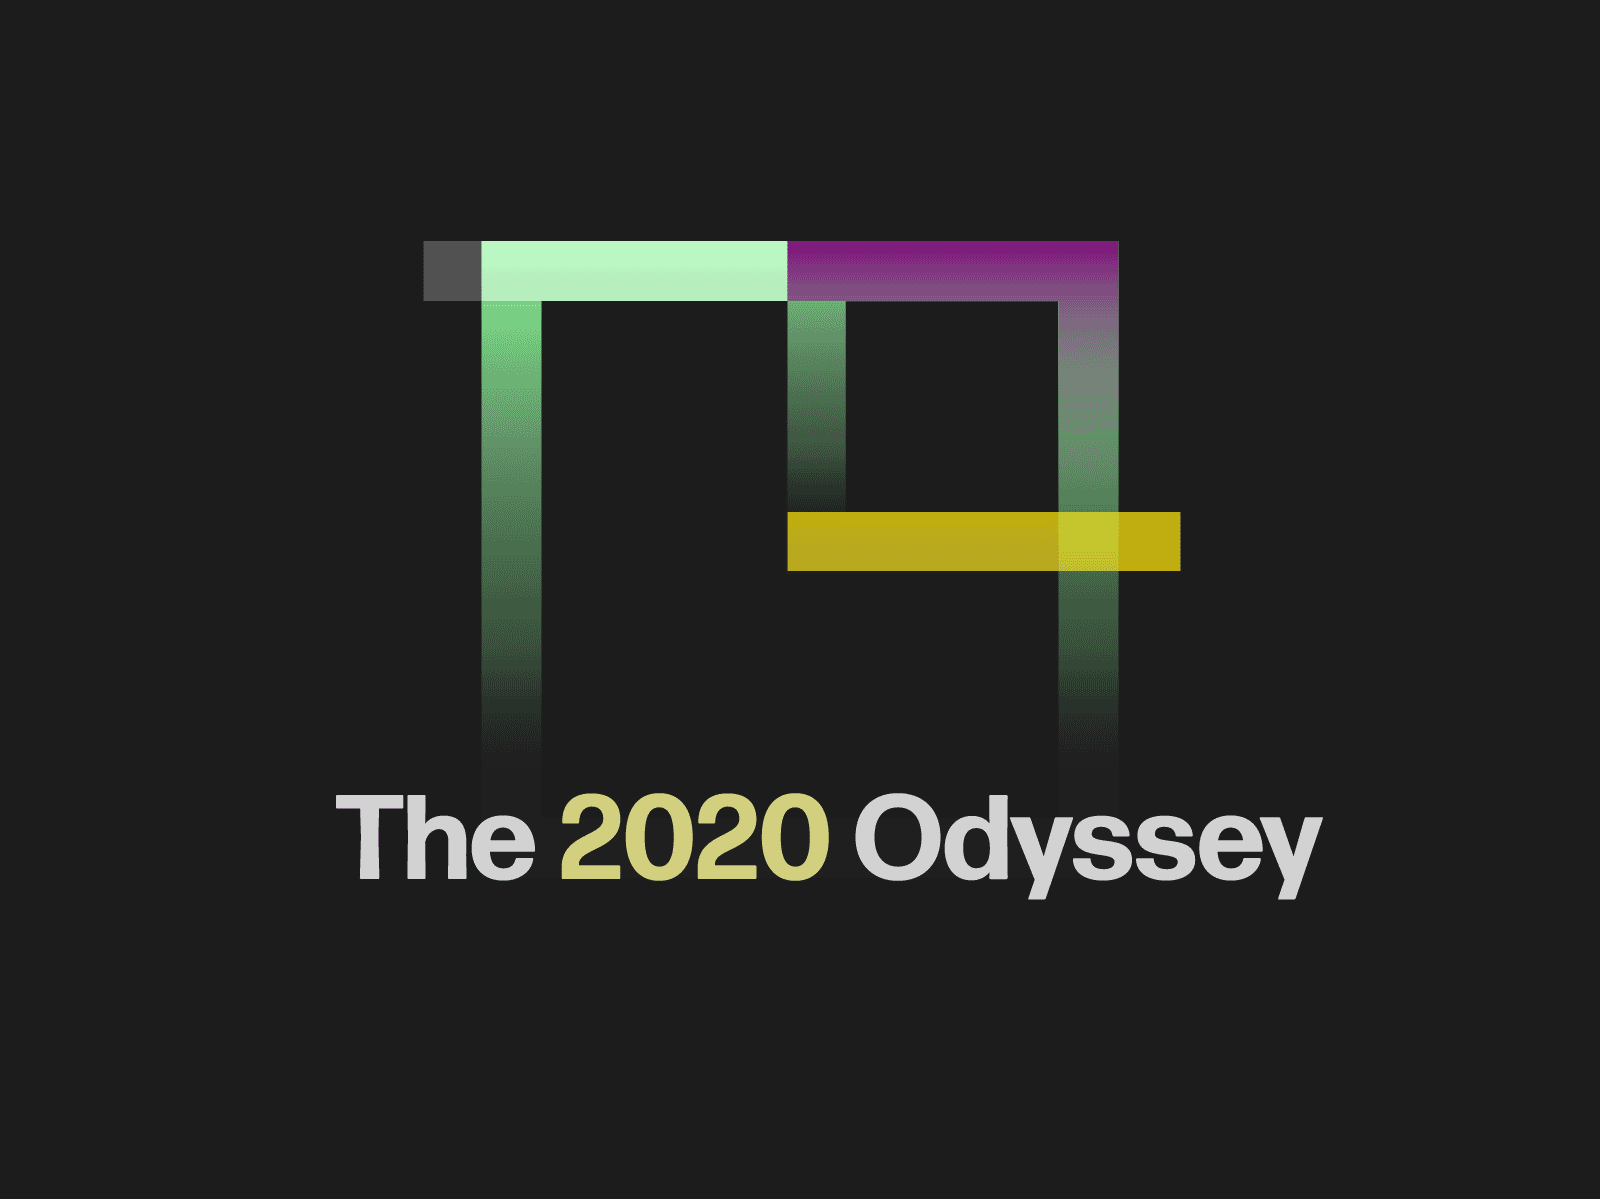 The 2020 Odyssey future illustrator now page past time vintage